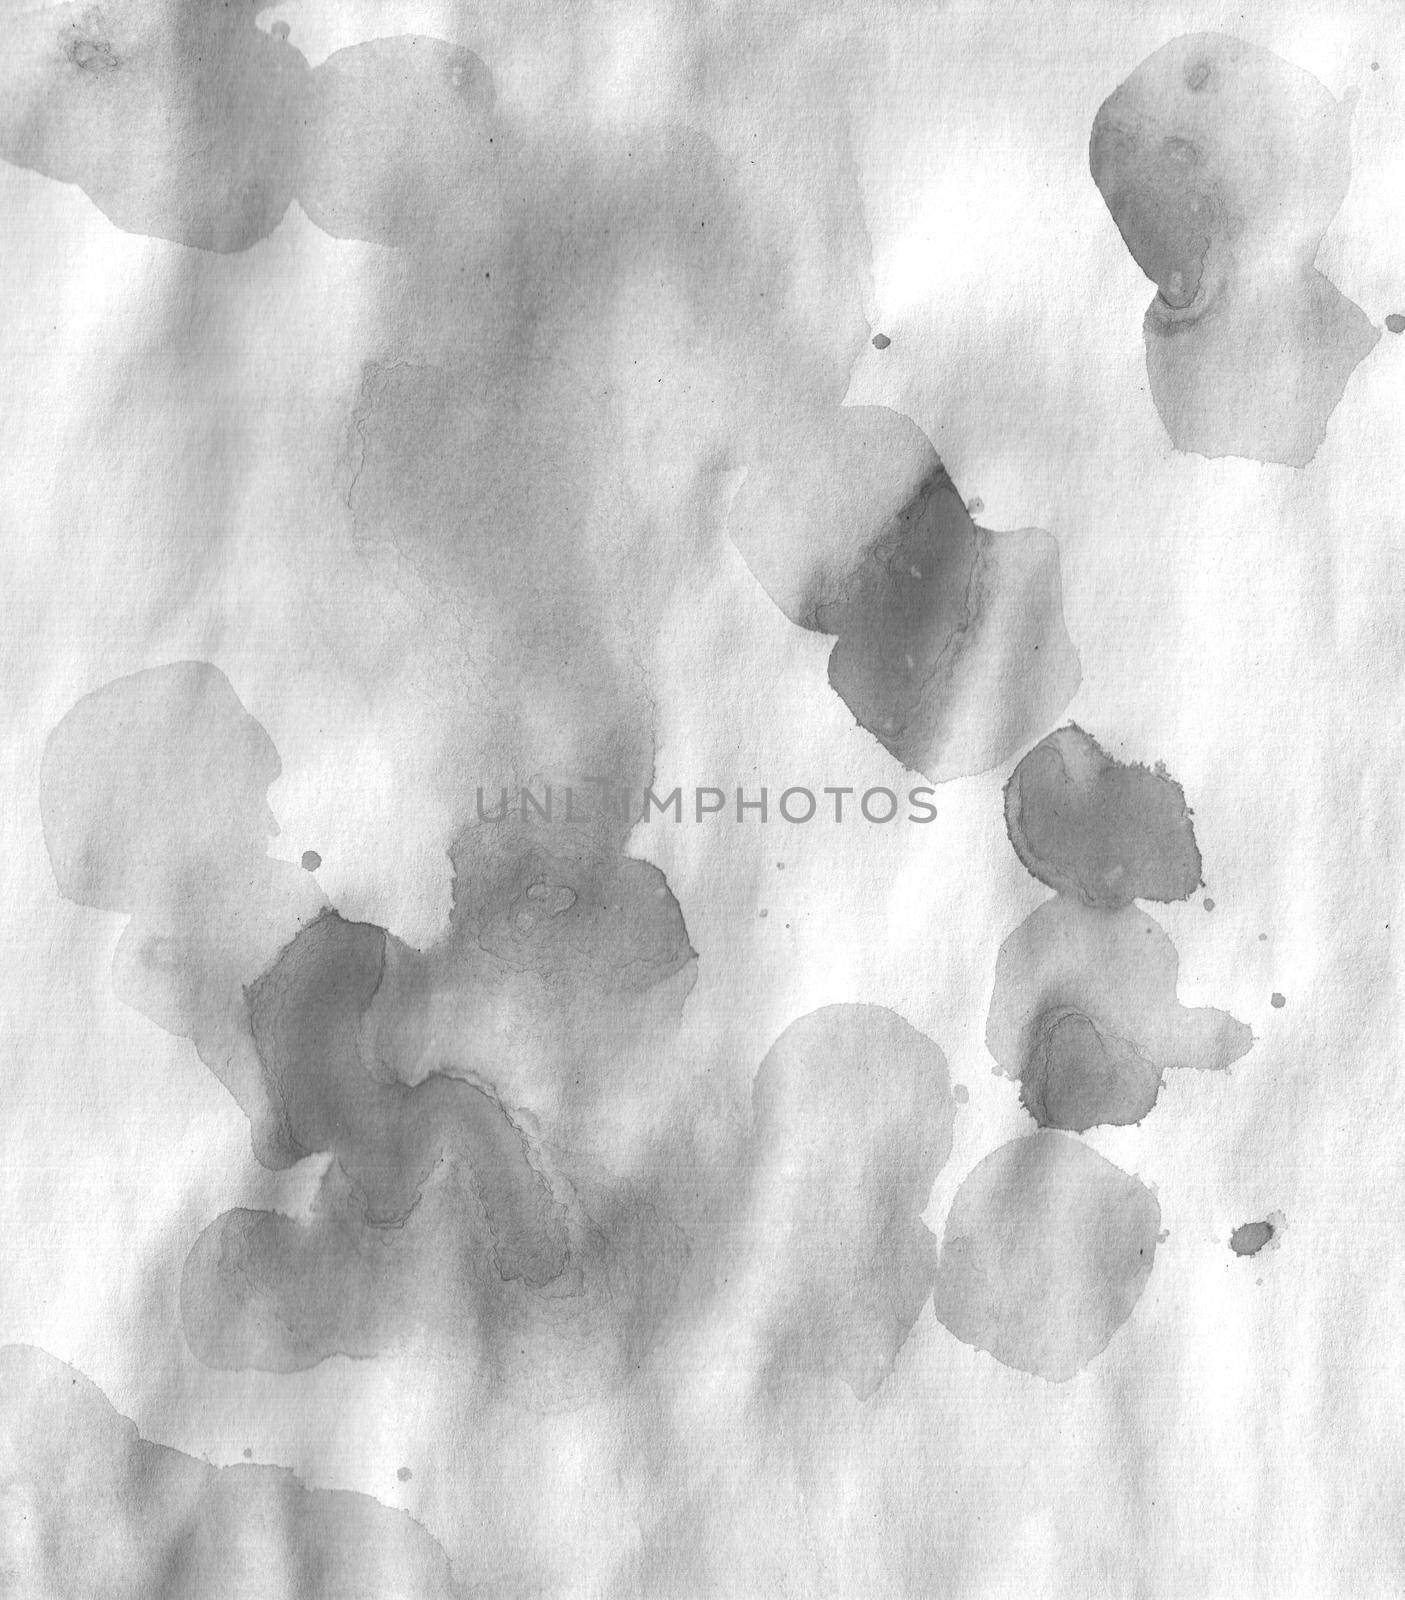 Black and white watercolor background